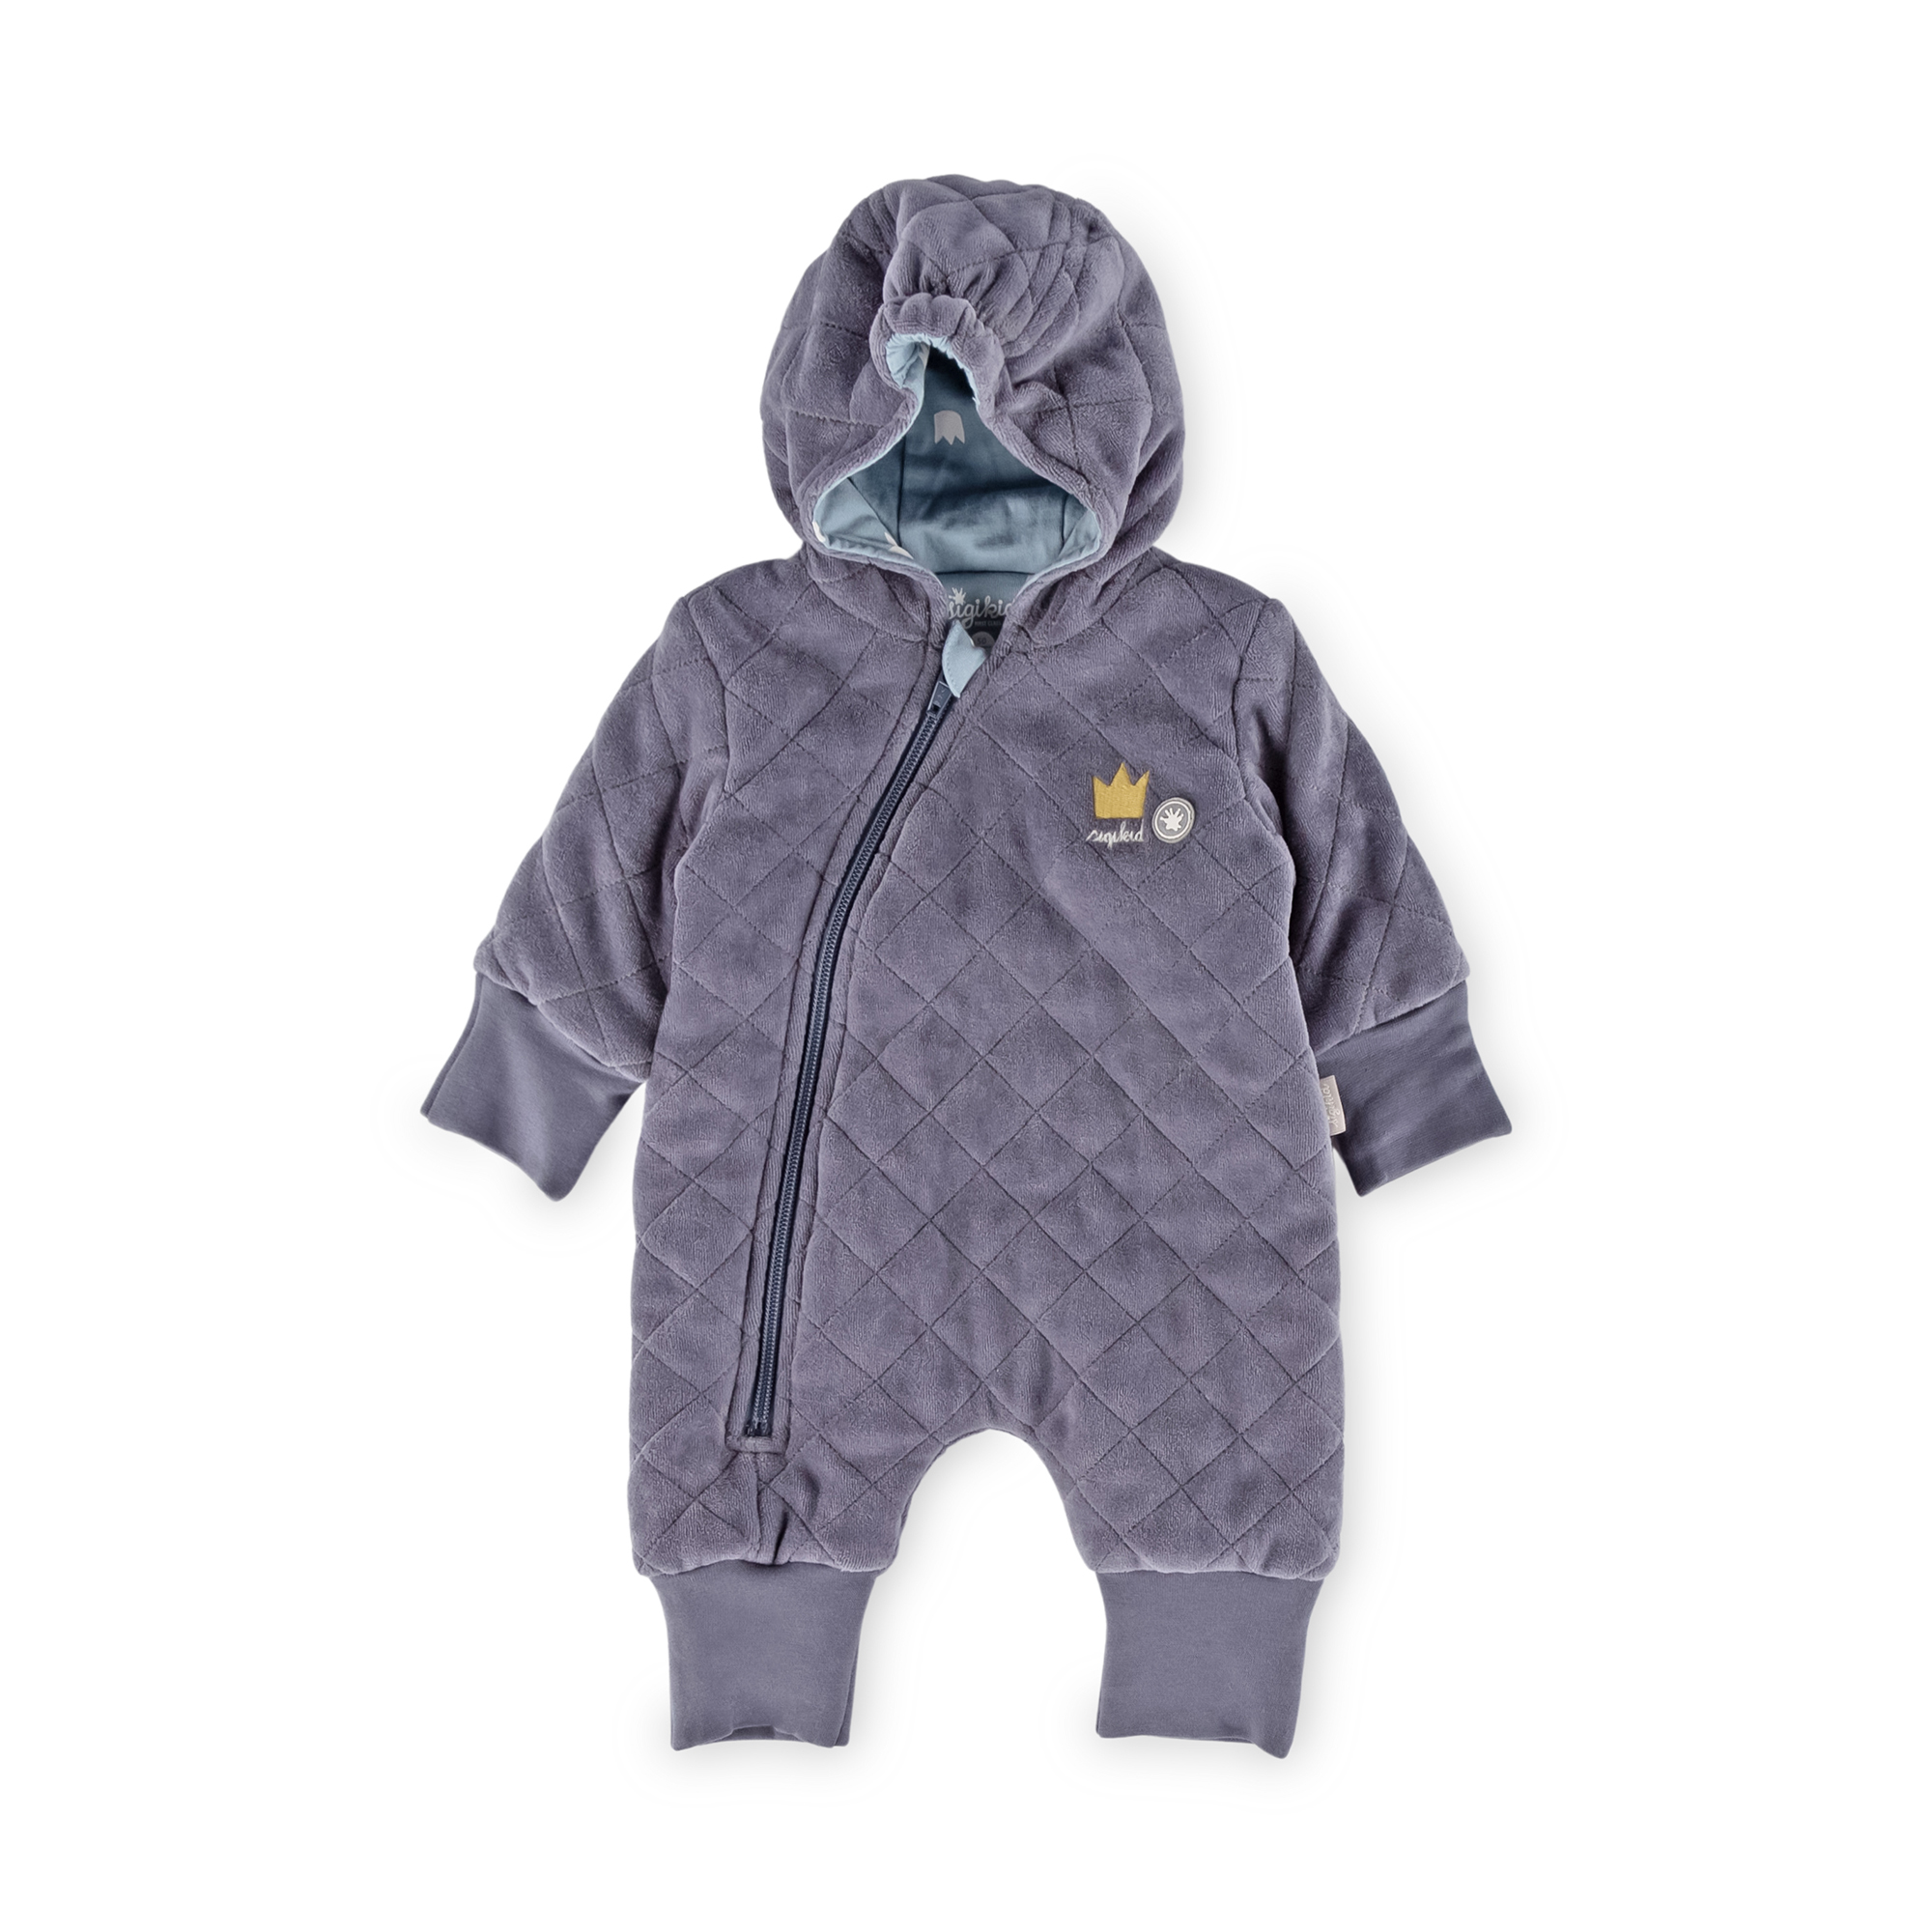 Quilted newborn baby velour overall dark grey, lined, foldable cuffs